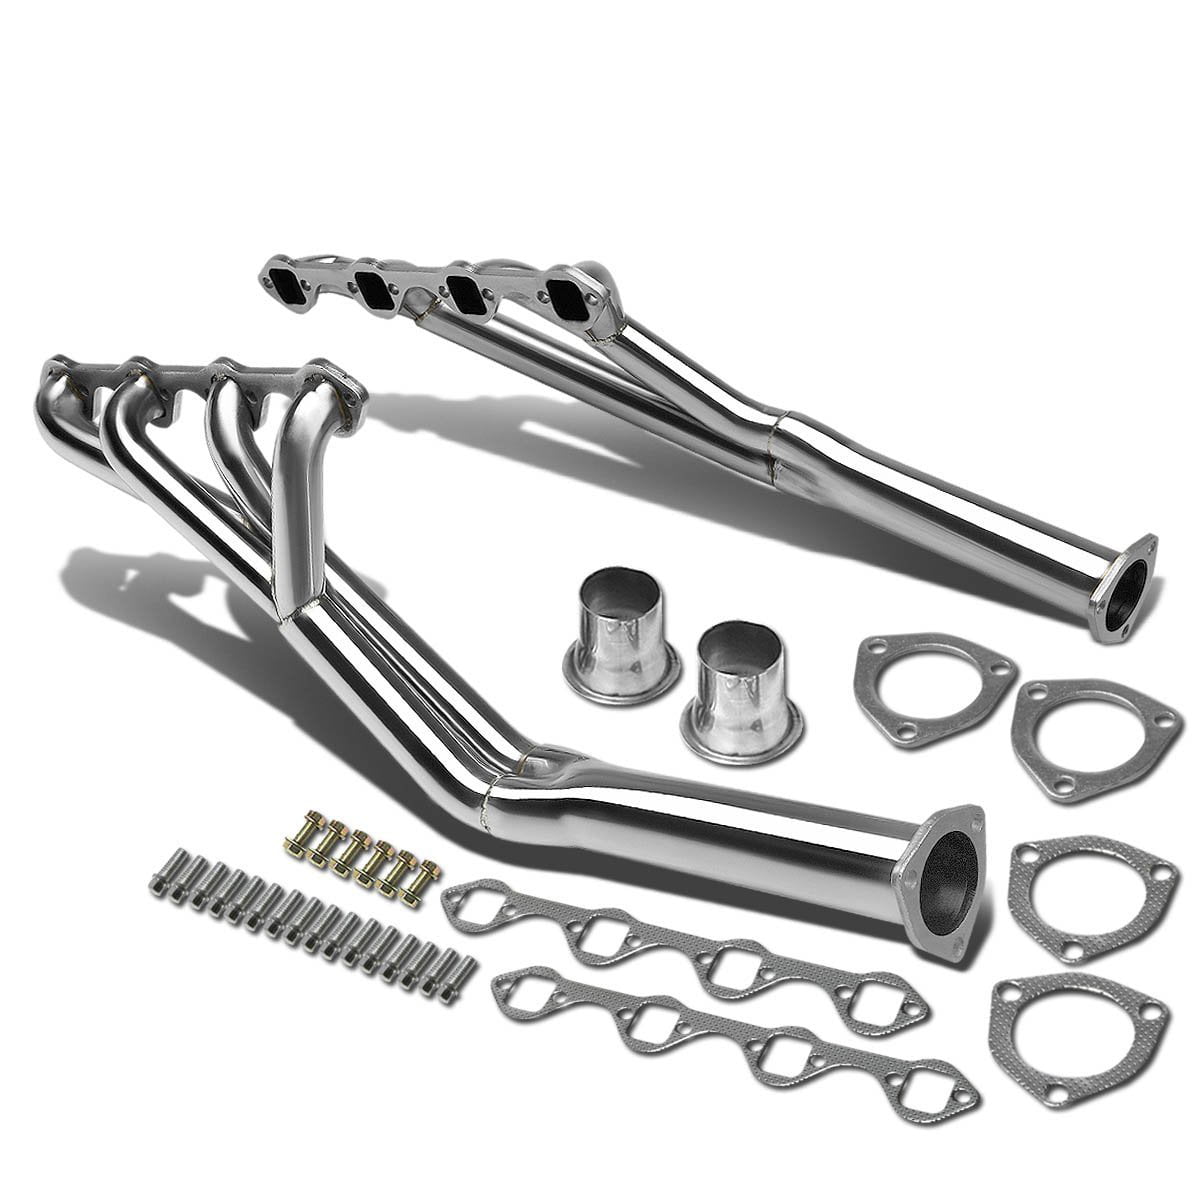 FOR Mustang/Cougar 260-302 5.0 63-77 Stainless Steel Header Exhaust Manifold